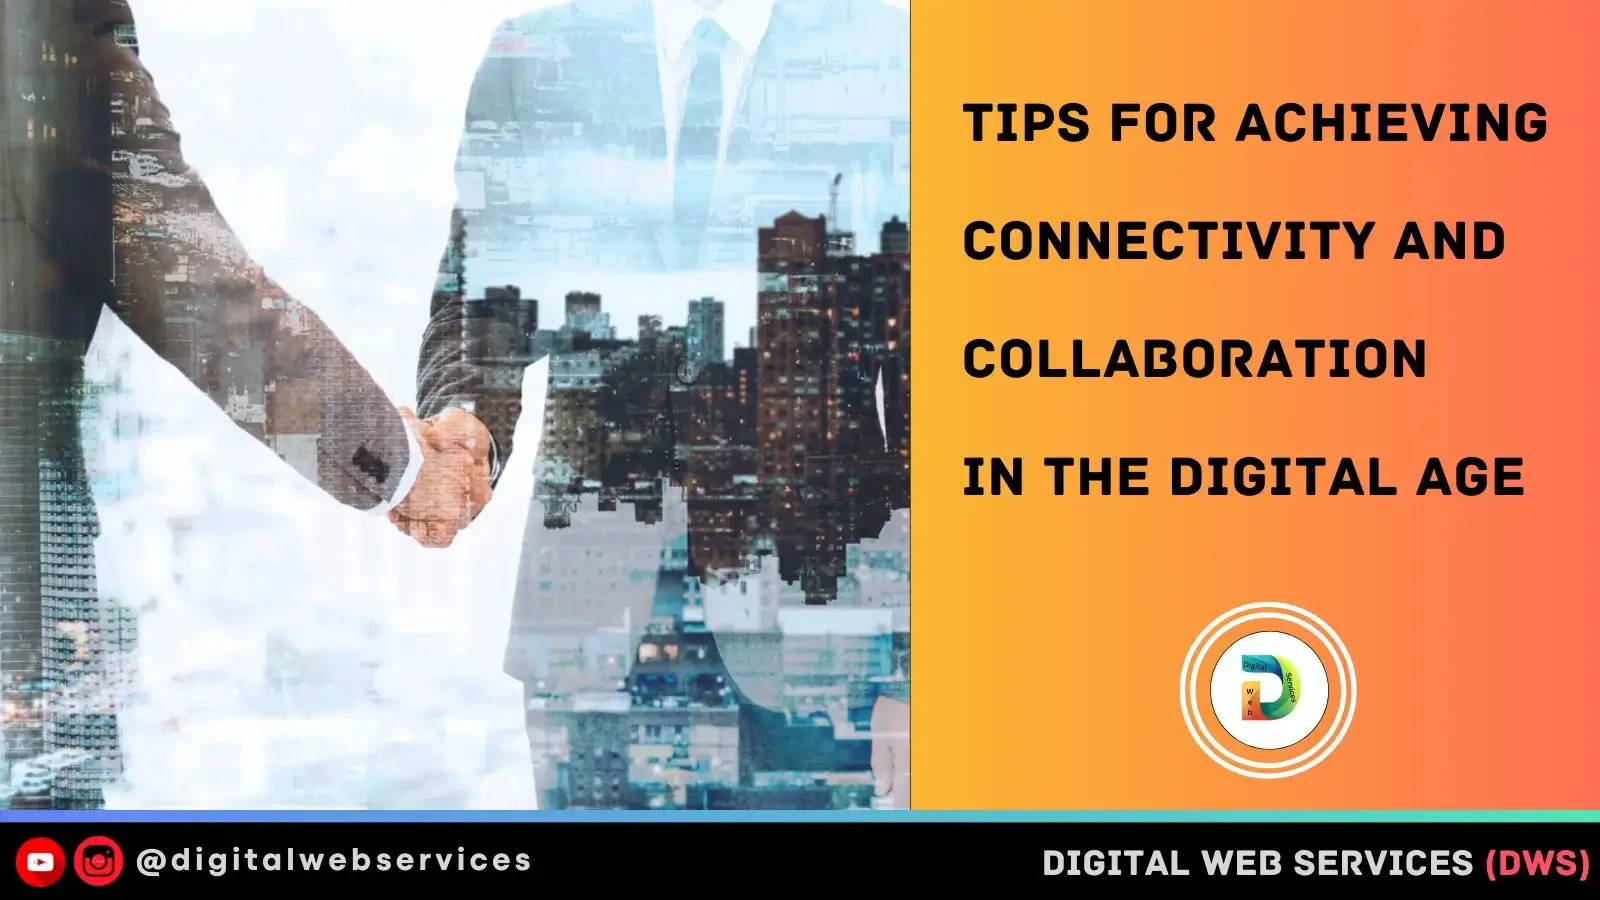 Tips For Achieving Connectivity and Collaboration in the Digital Age